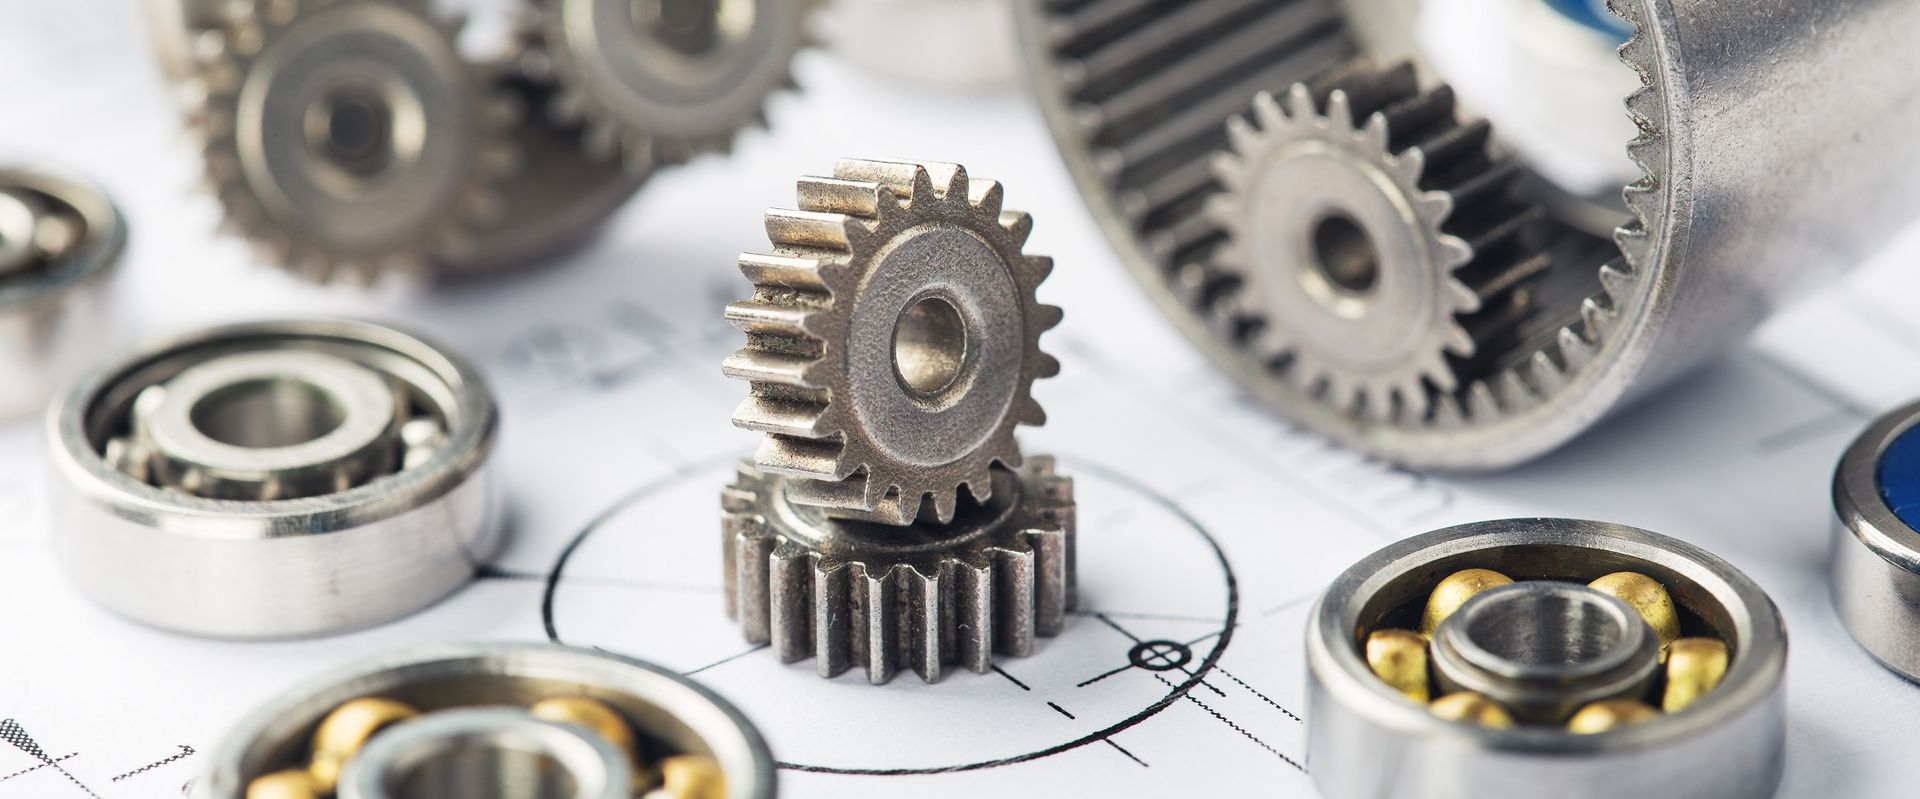 There are many different types of gears and bearings on the table.